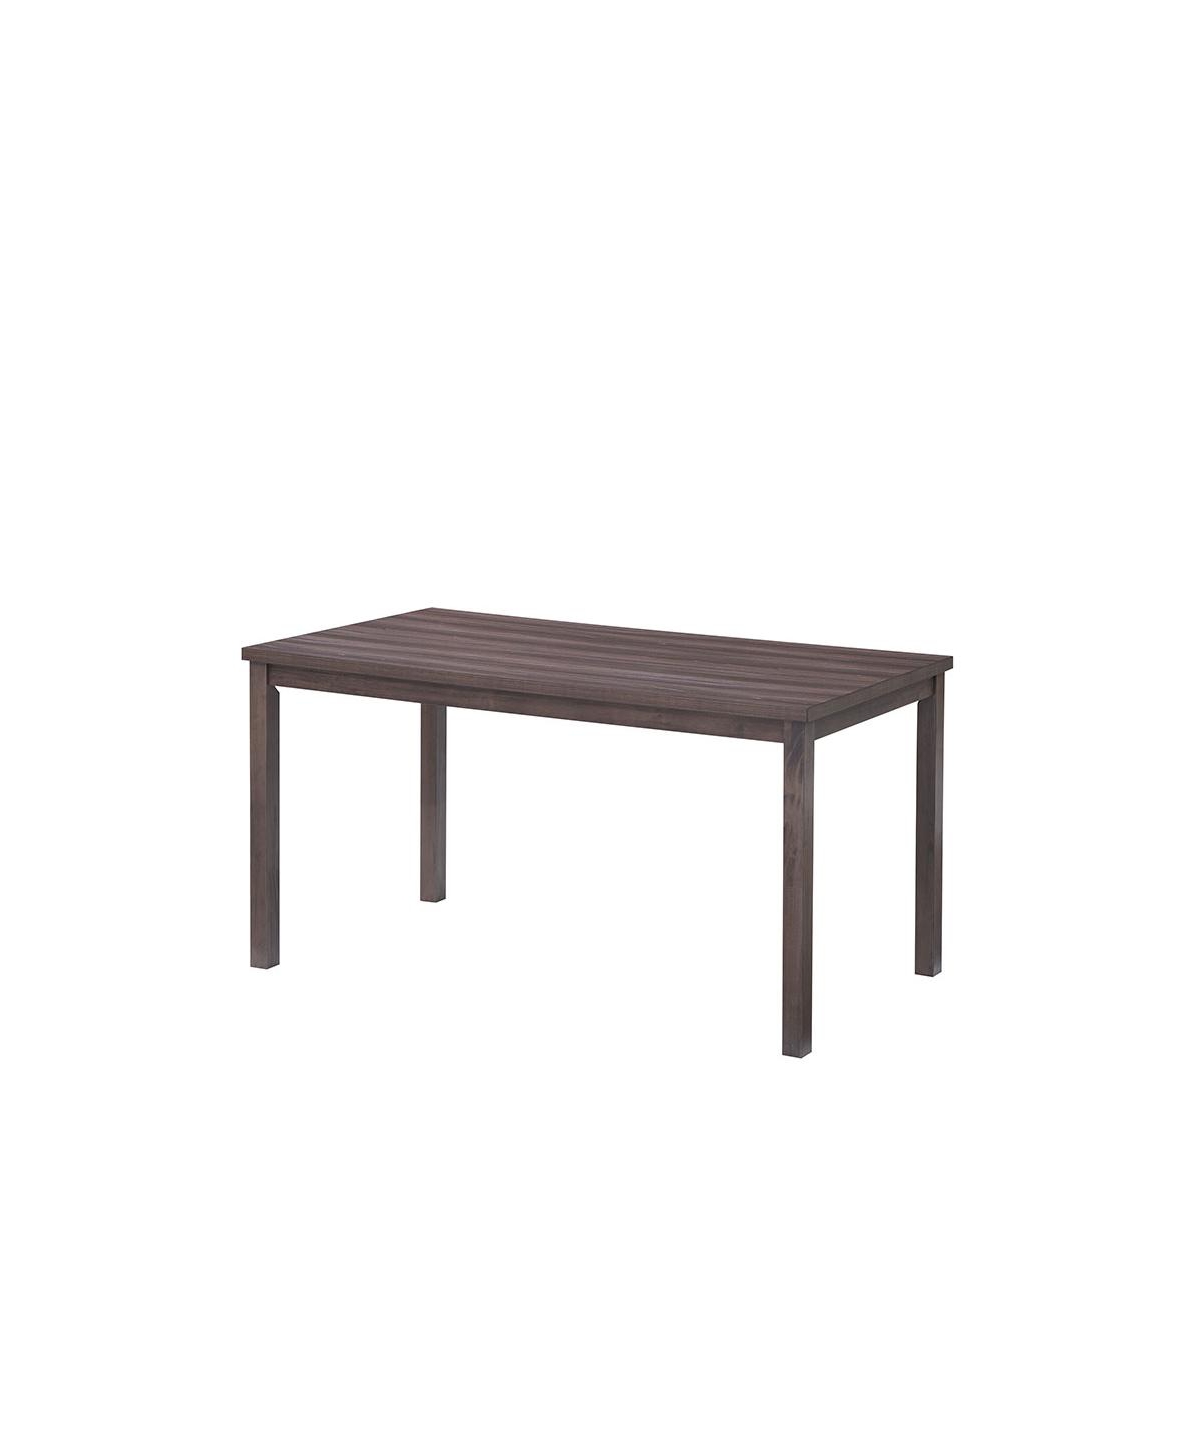 12641045 Max Meadows Laminate Counter Height Table sku 12641045